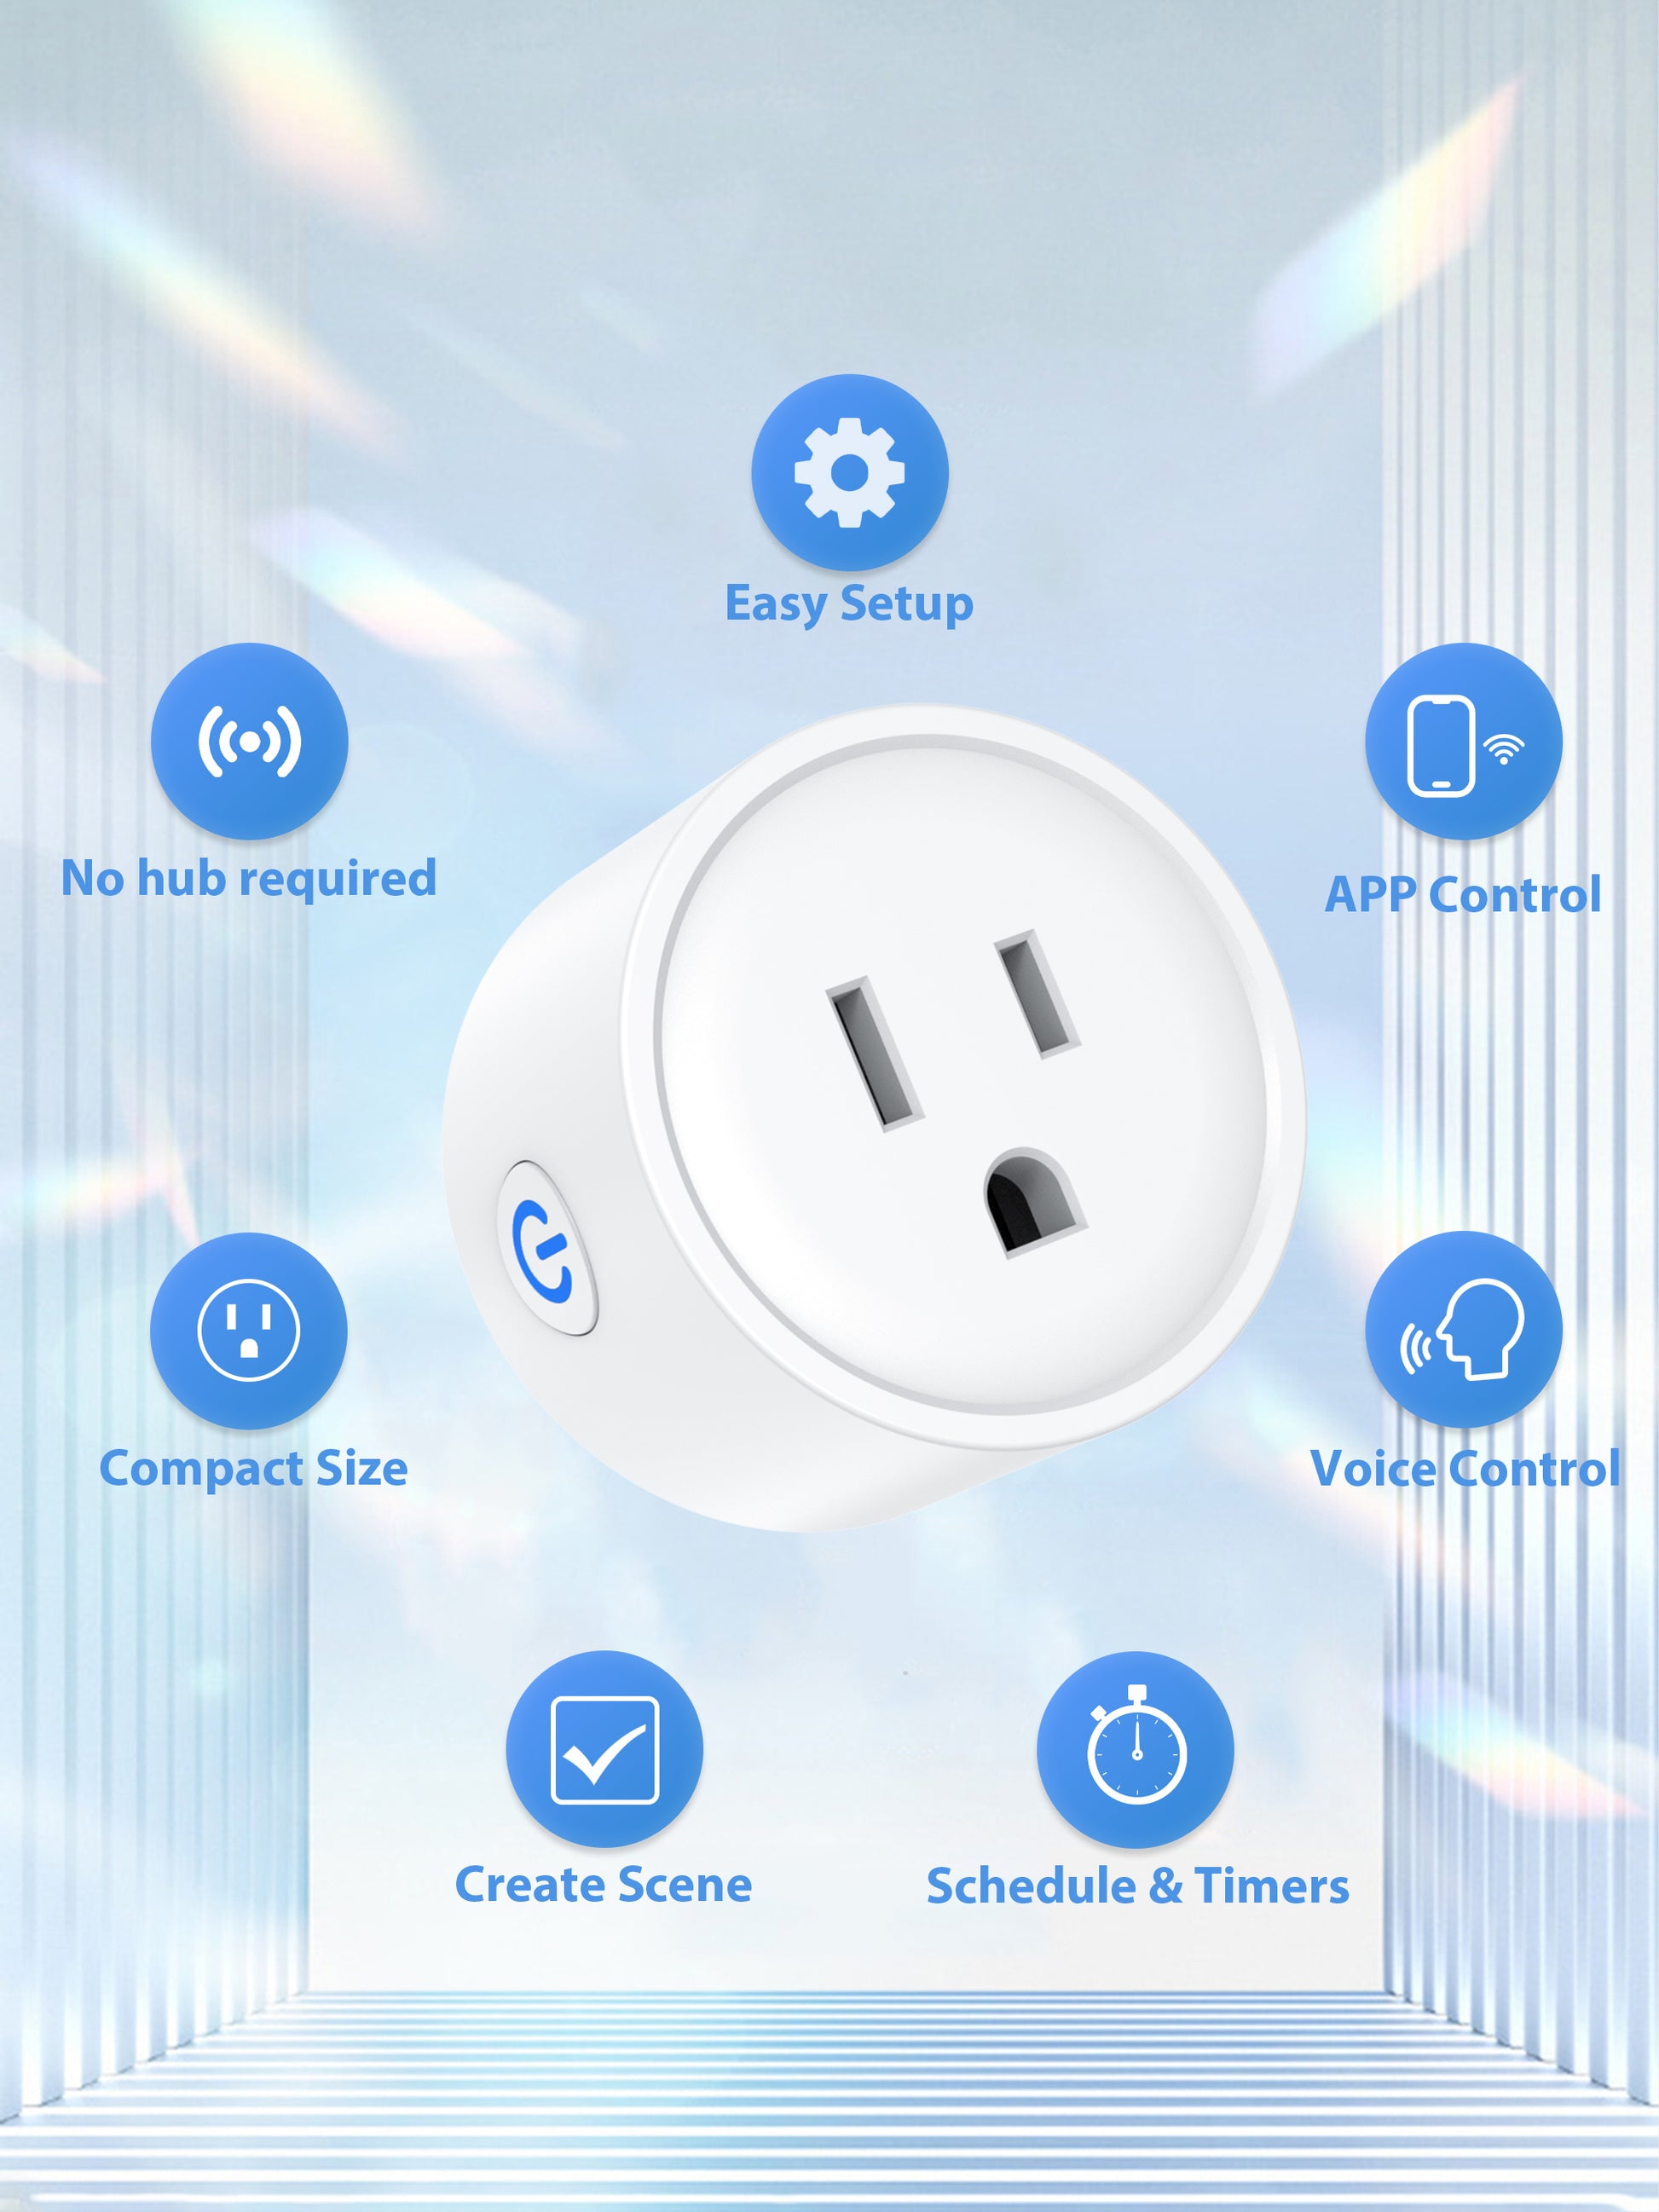 SP3 WiFi Smart Plug - works with LaView App – LaView Store USA